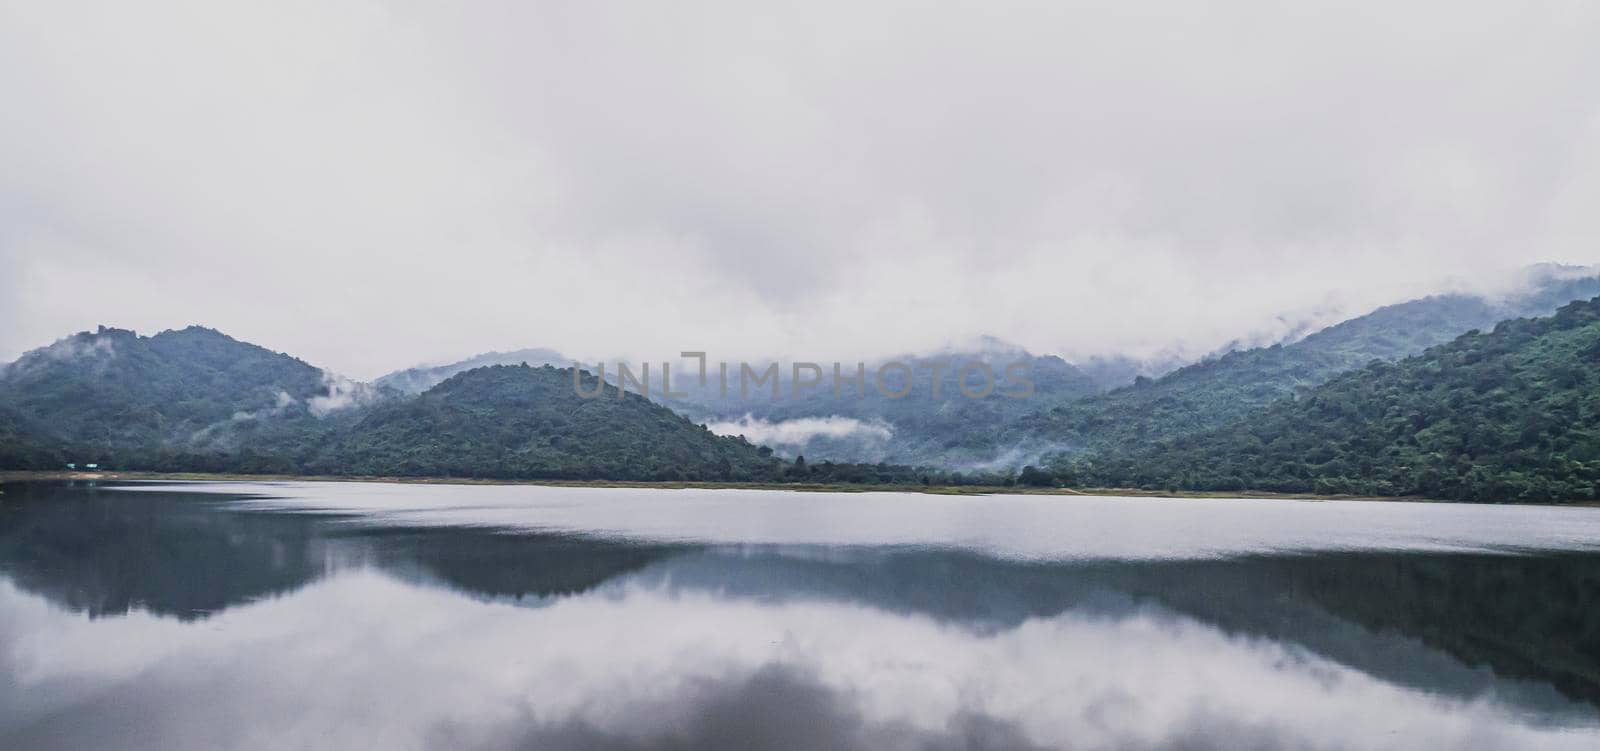 Panorama view of  mountains Lake with tropical trees forest . Beautiful A Calm Lake With Mountain ranges on background . Wonderful atmospheric landscape by Petrichor